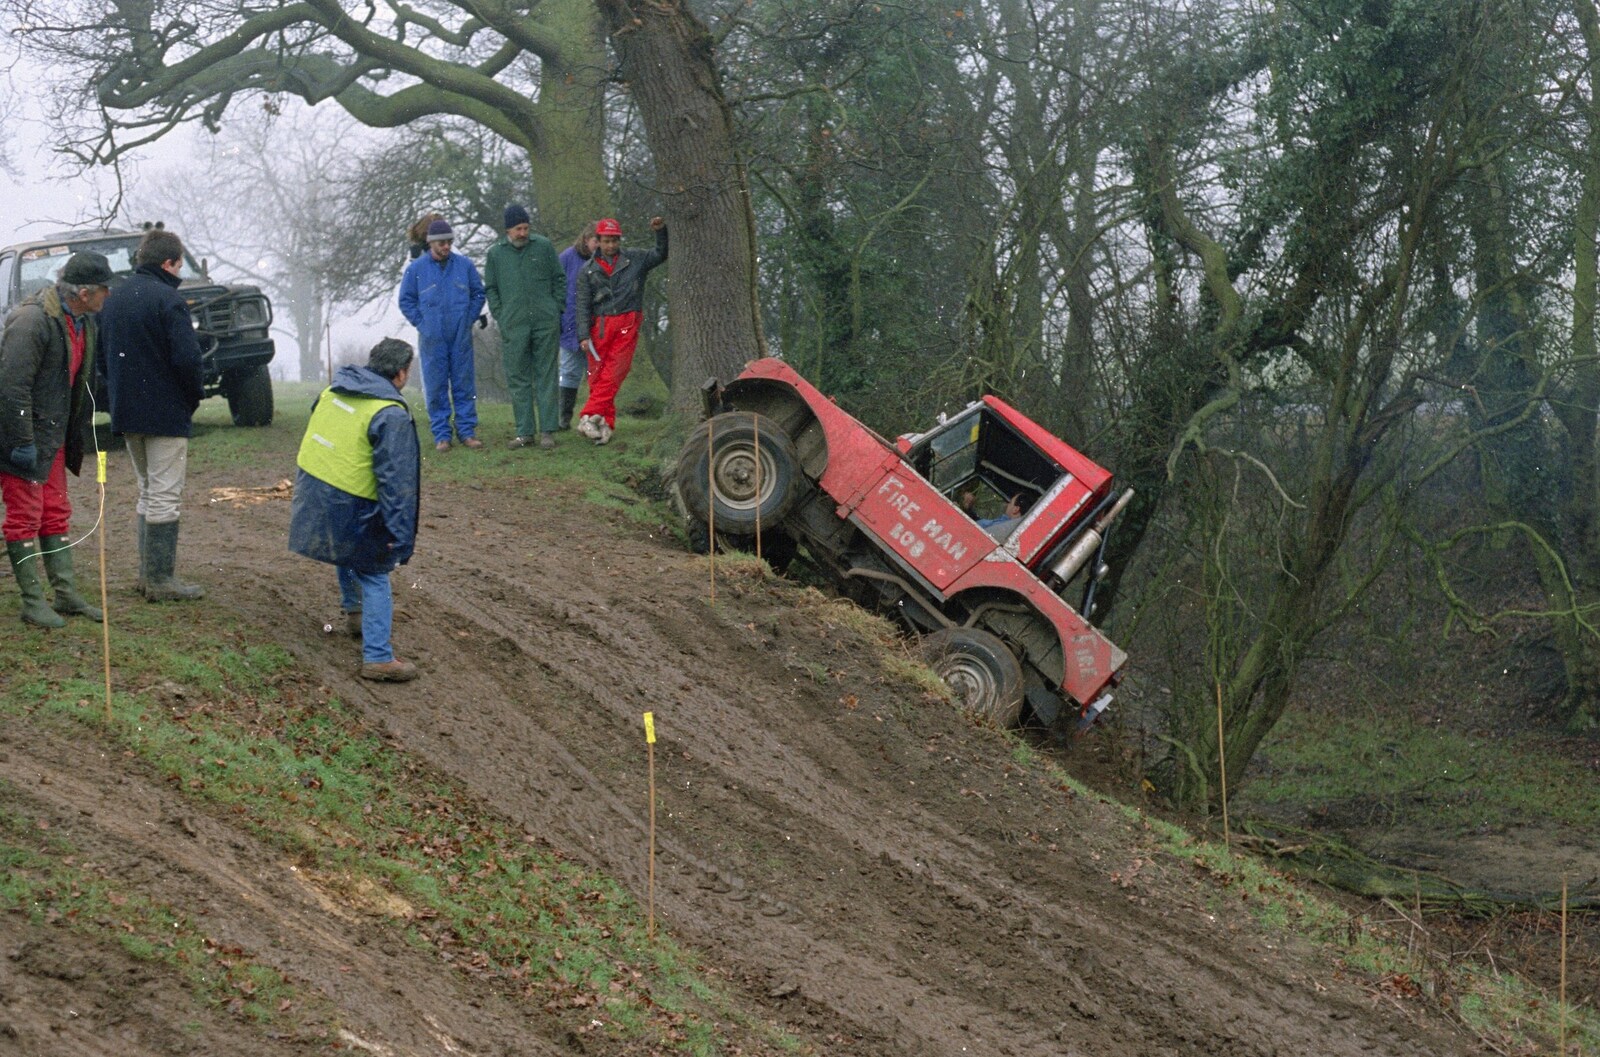 'Fire man Bob' climbs a steep hill from Printec at the Park Hotel, Diss, Norfolk - 14th January 1992